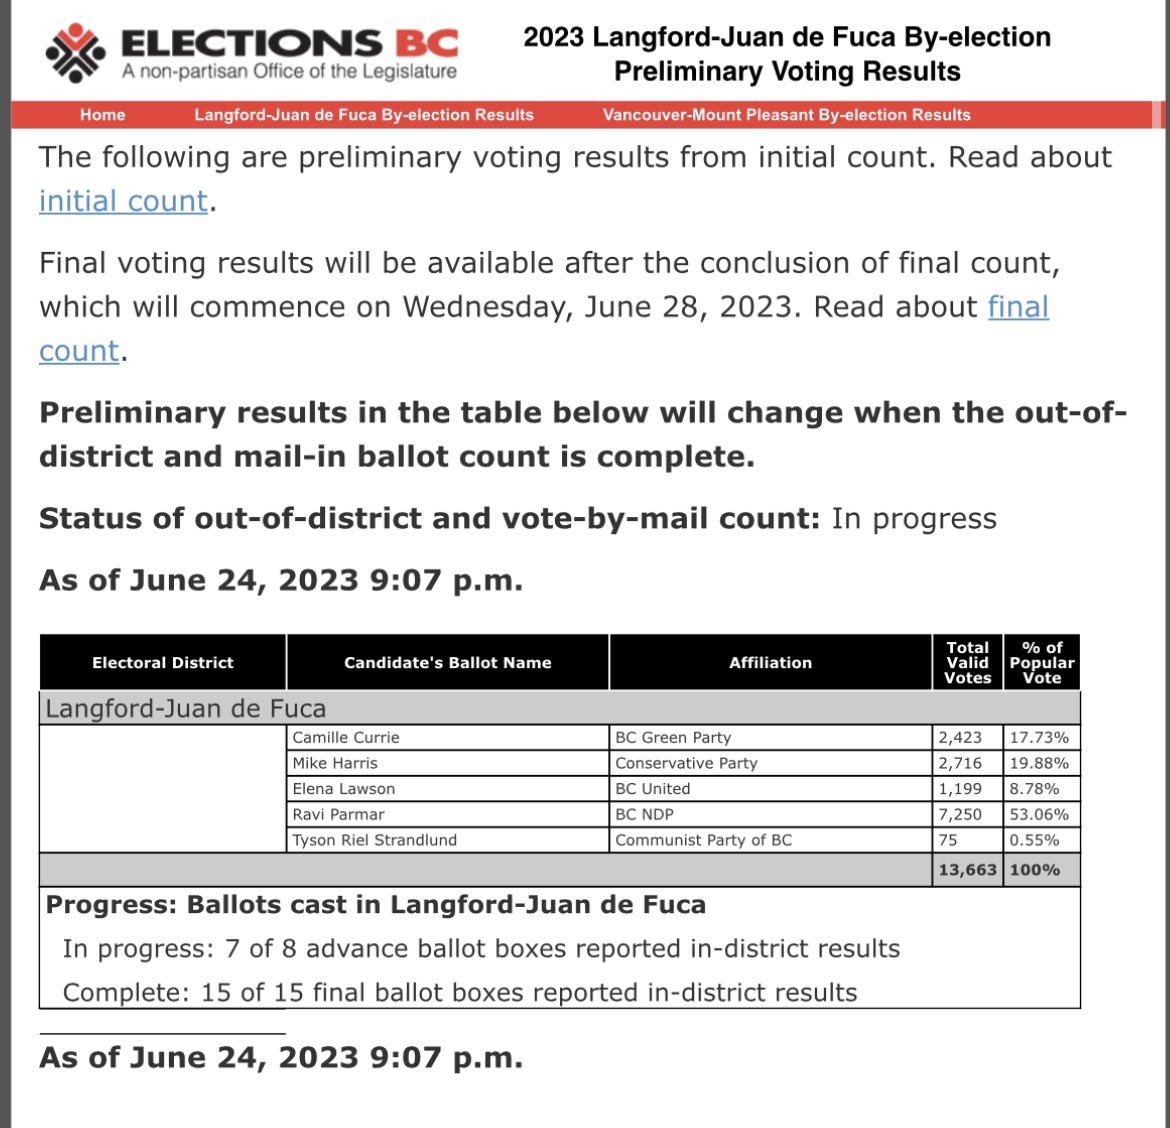 One last look at these results now they are mostly final. BC United takes a distance 4th place finish after a closer 3rd place result in 2020. That’s going to lead to a lot of conversations I’m sure. #bcpoli